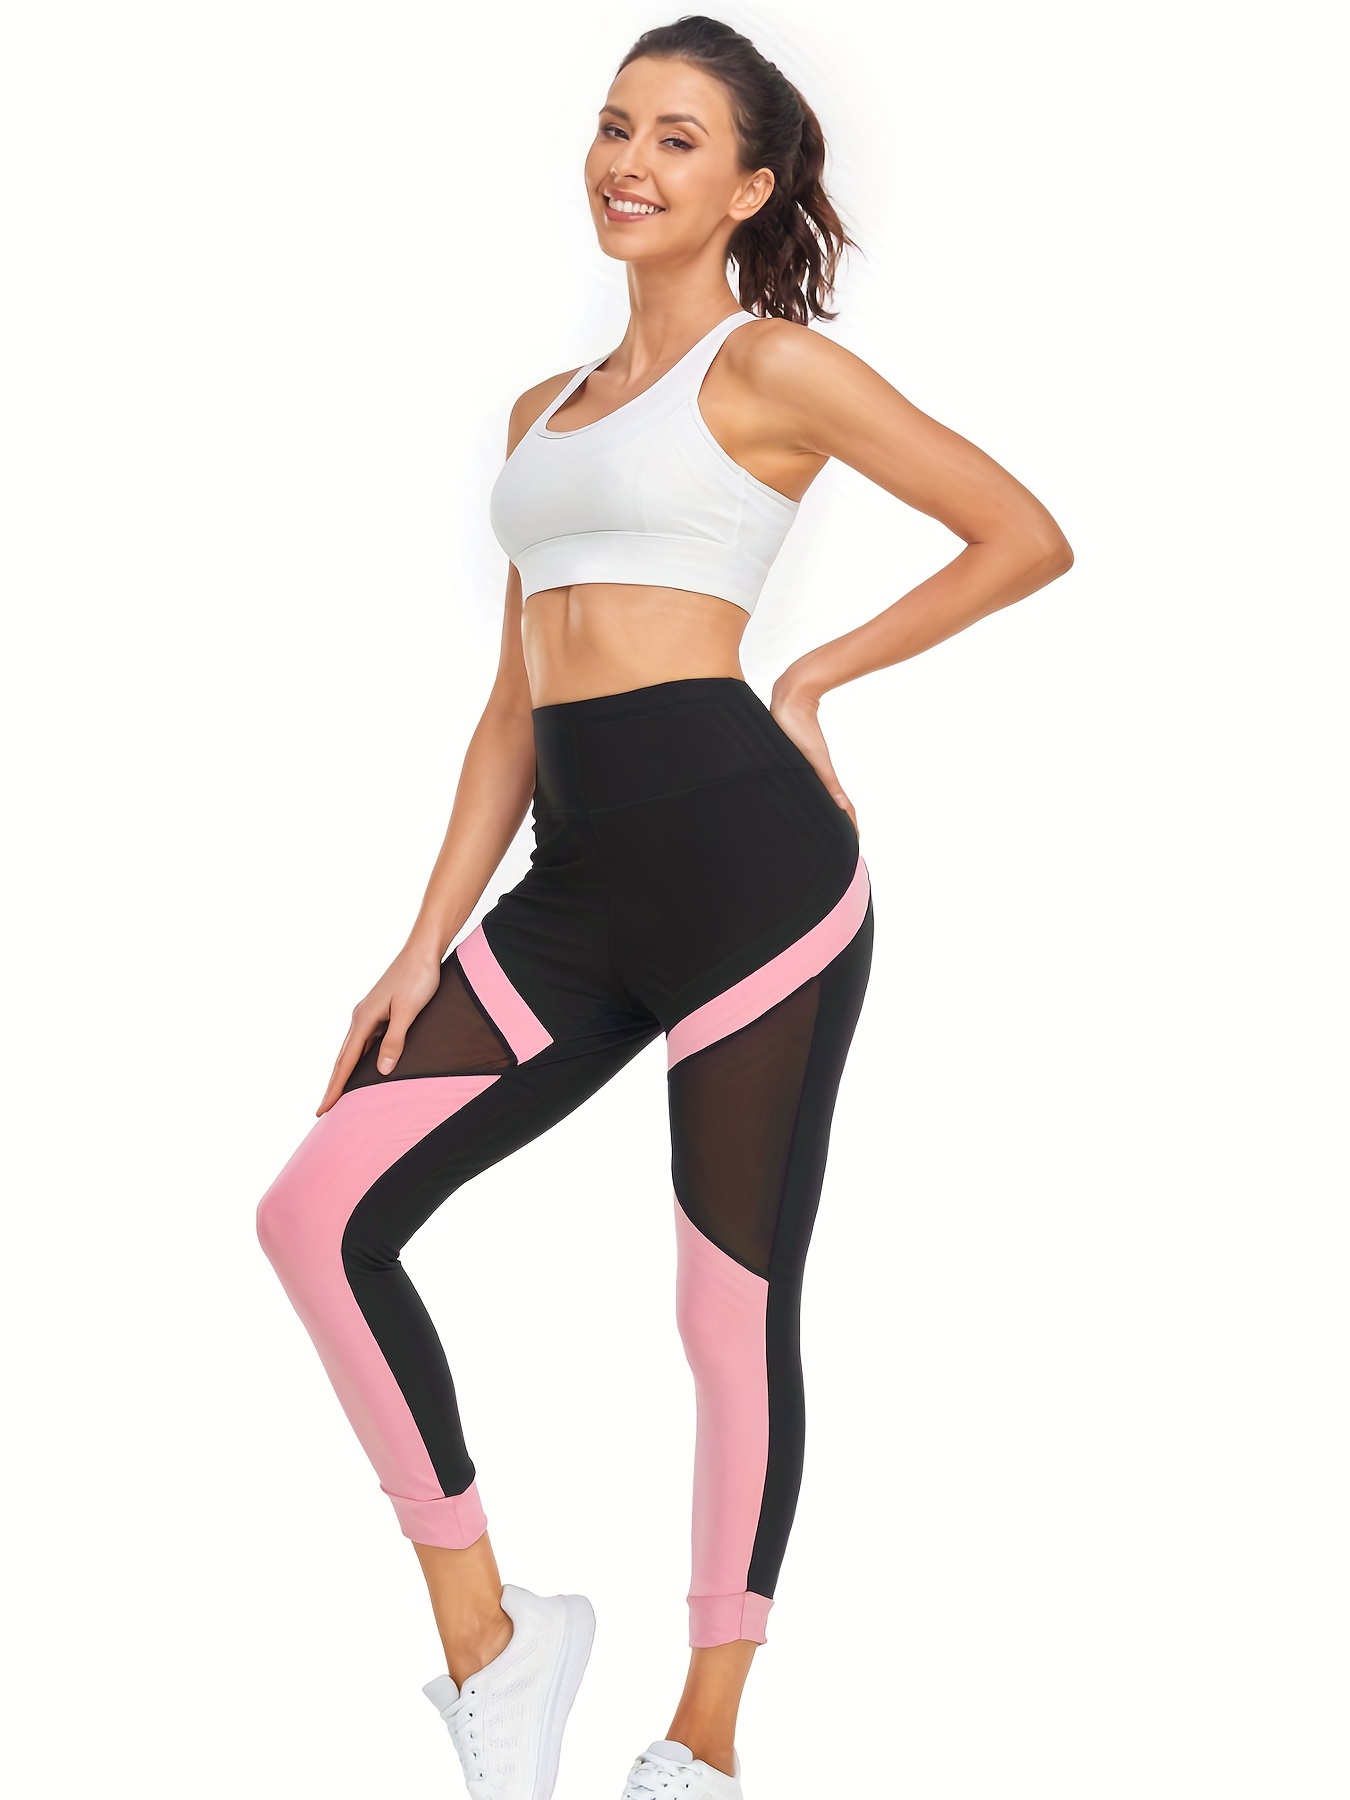 Amazon.com: LA12ST Women's Stretchy Skinny Sheer Mesh Insert Pockets Workout  Leggings Active Performance Yoga Tights : Sports & Outdoors